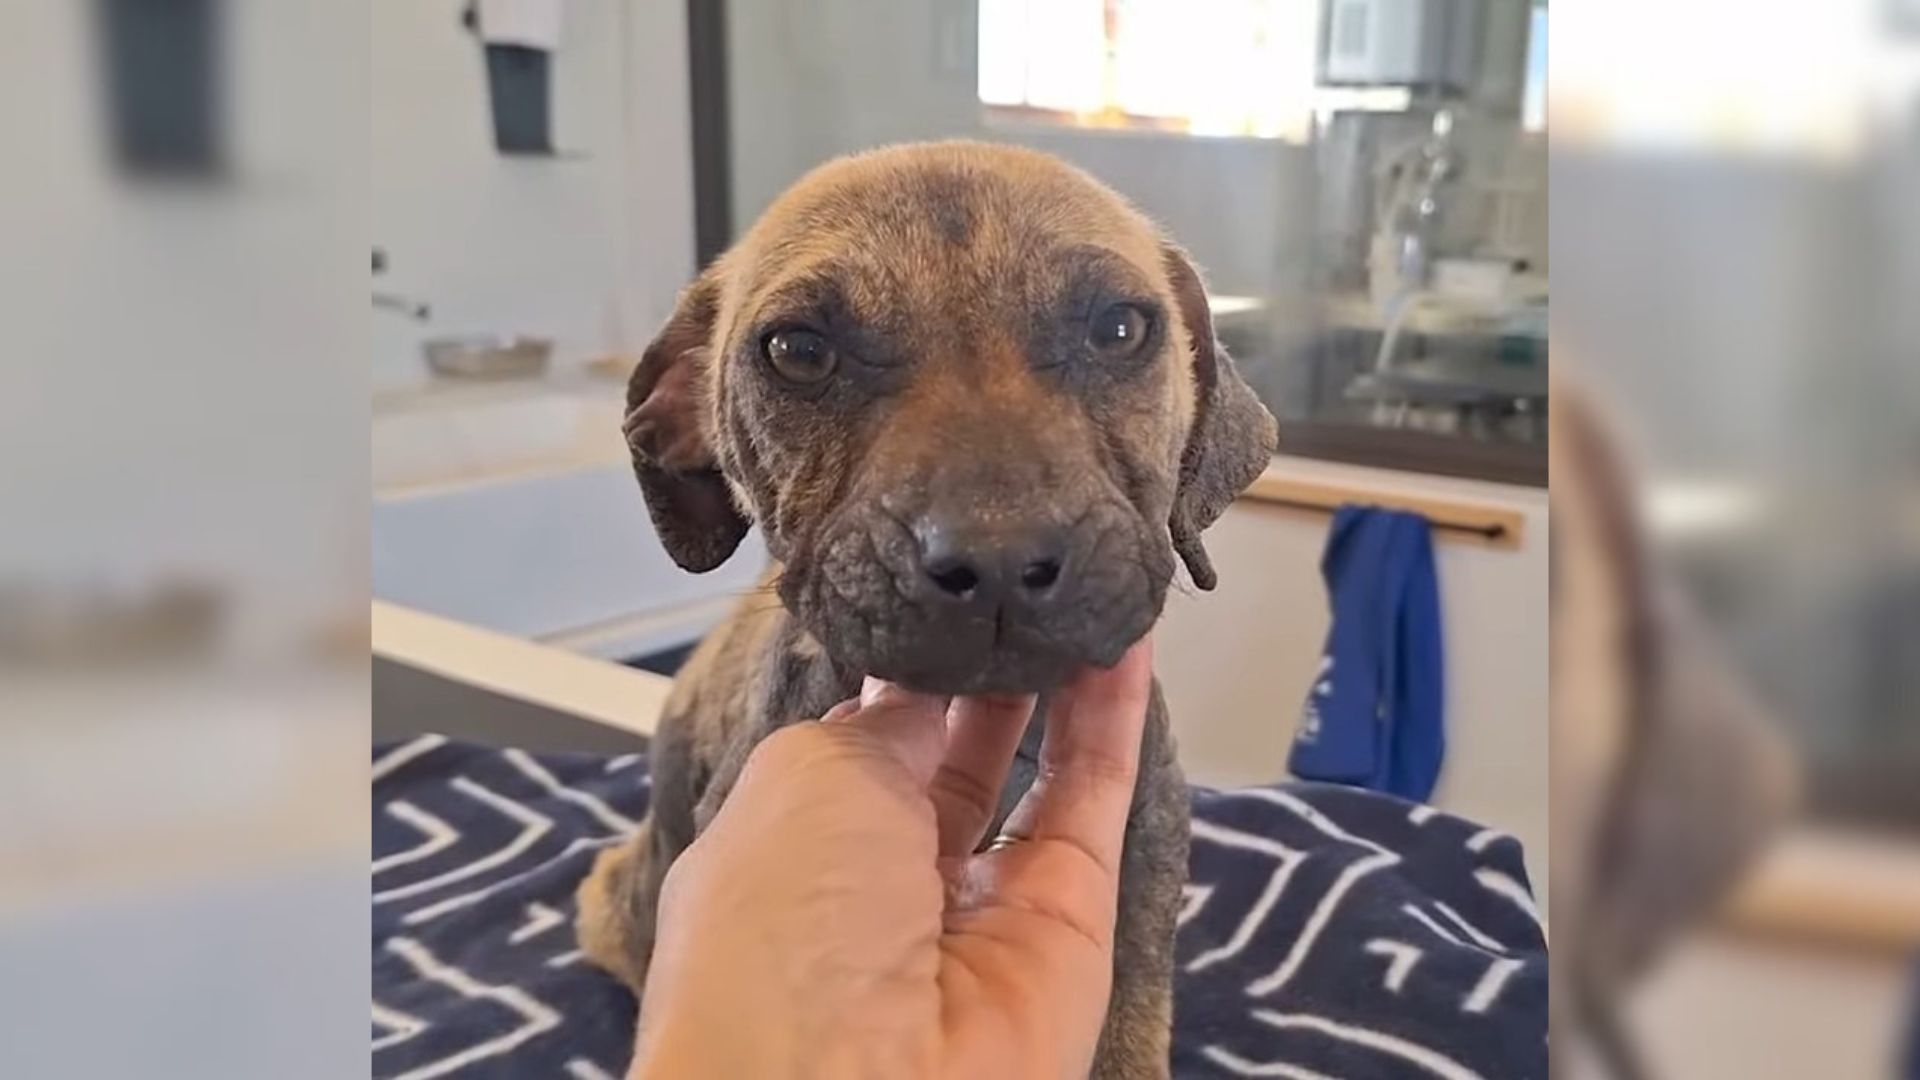 Abandoned Pup Was Really Lonely But Then She Met Someone Who Changed Everything